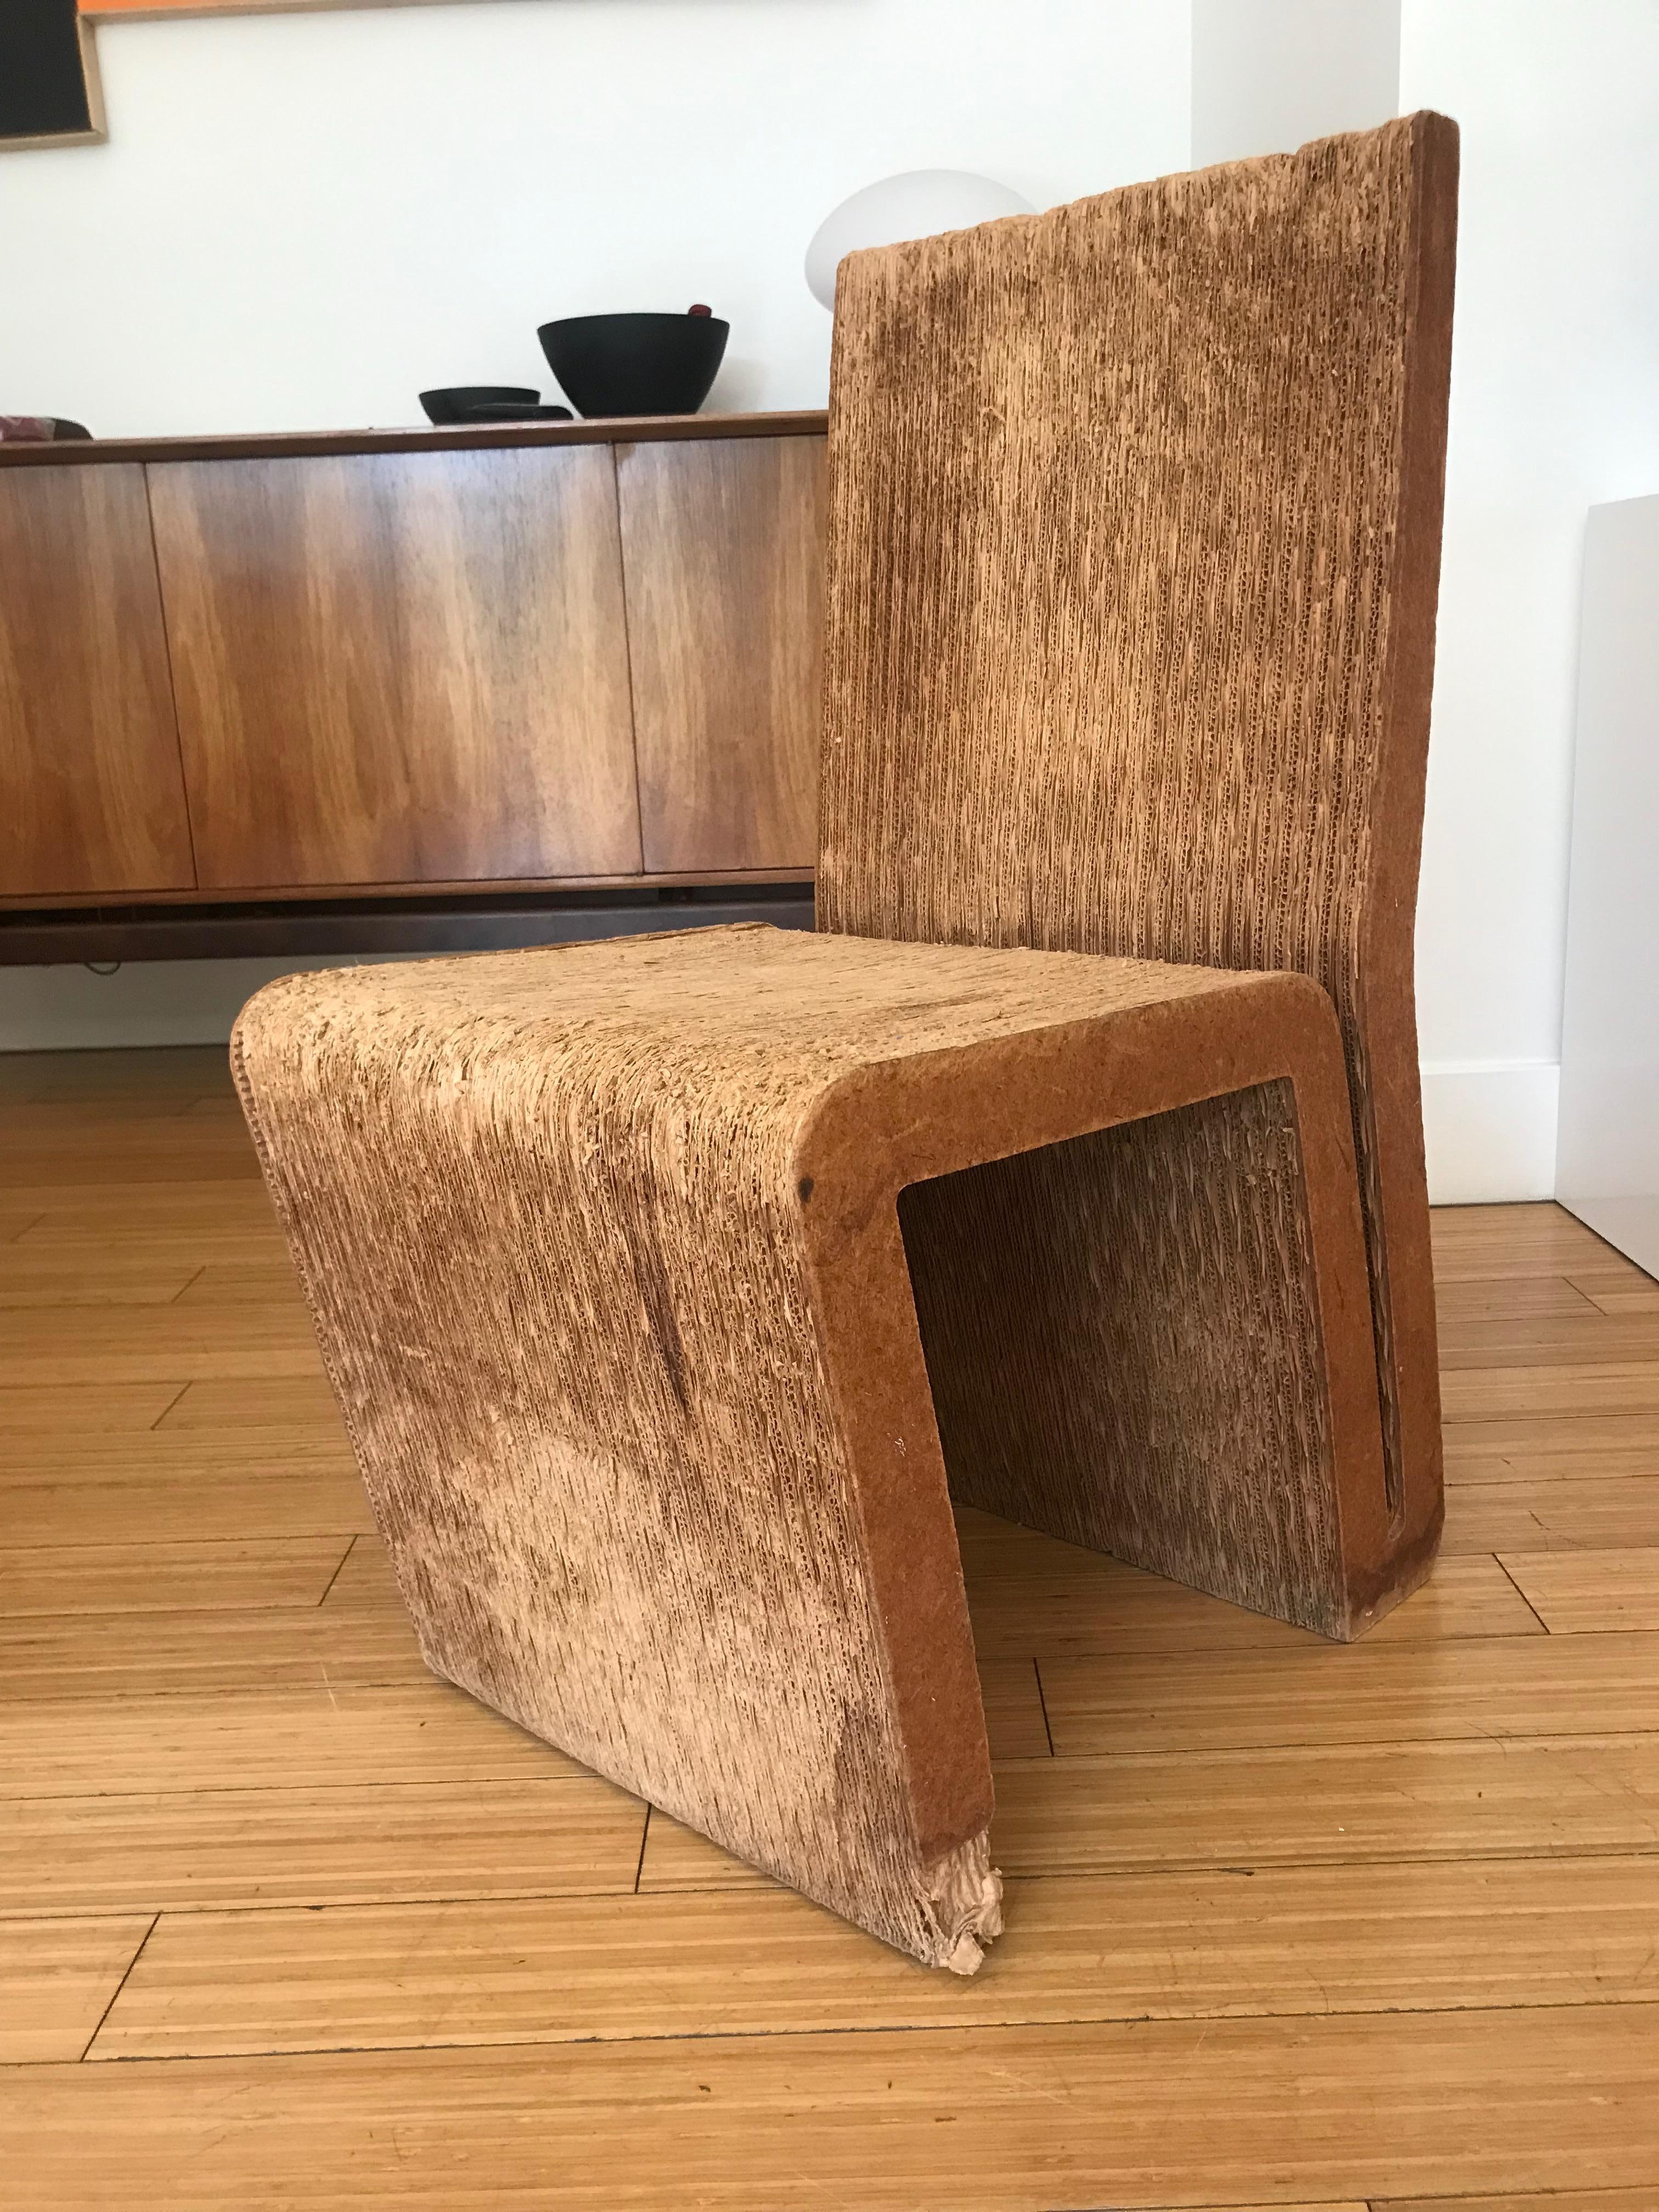 American Frank Gehry 'Easy Edges' Chair Art Object, 1970s